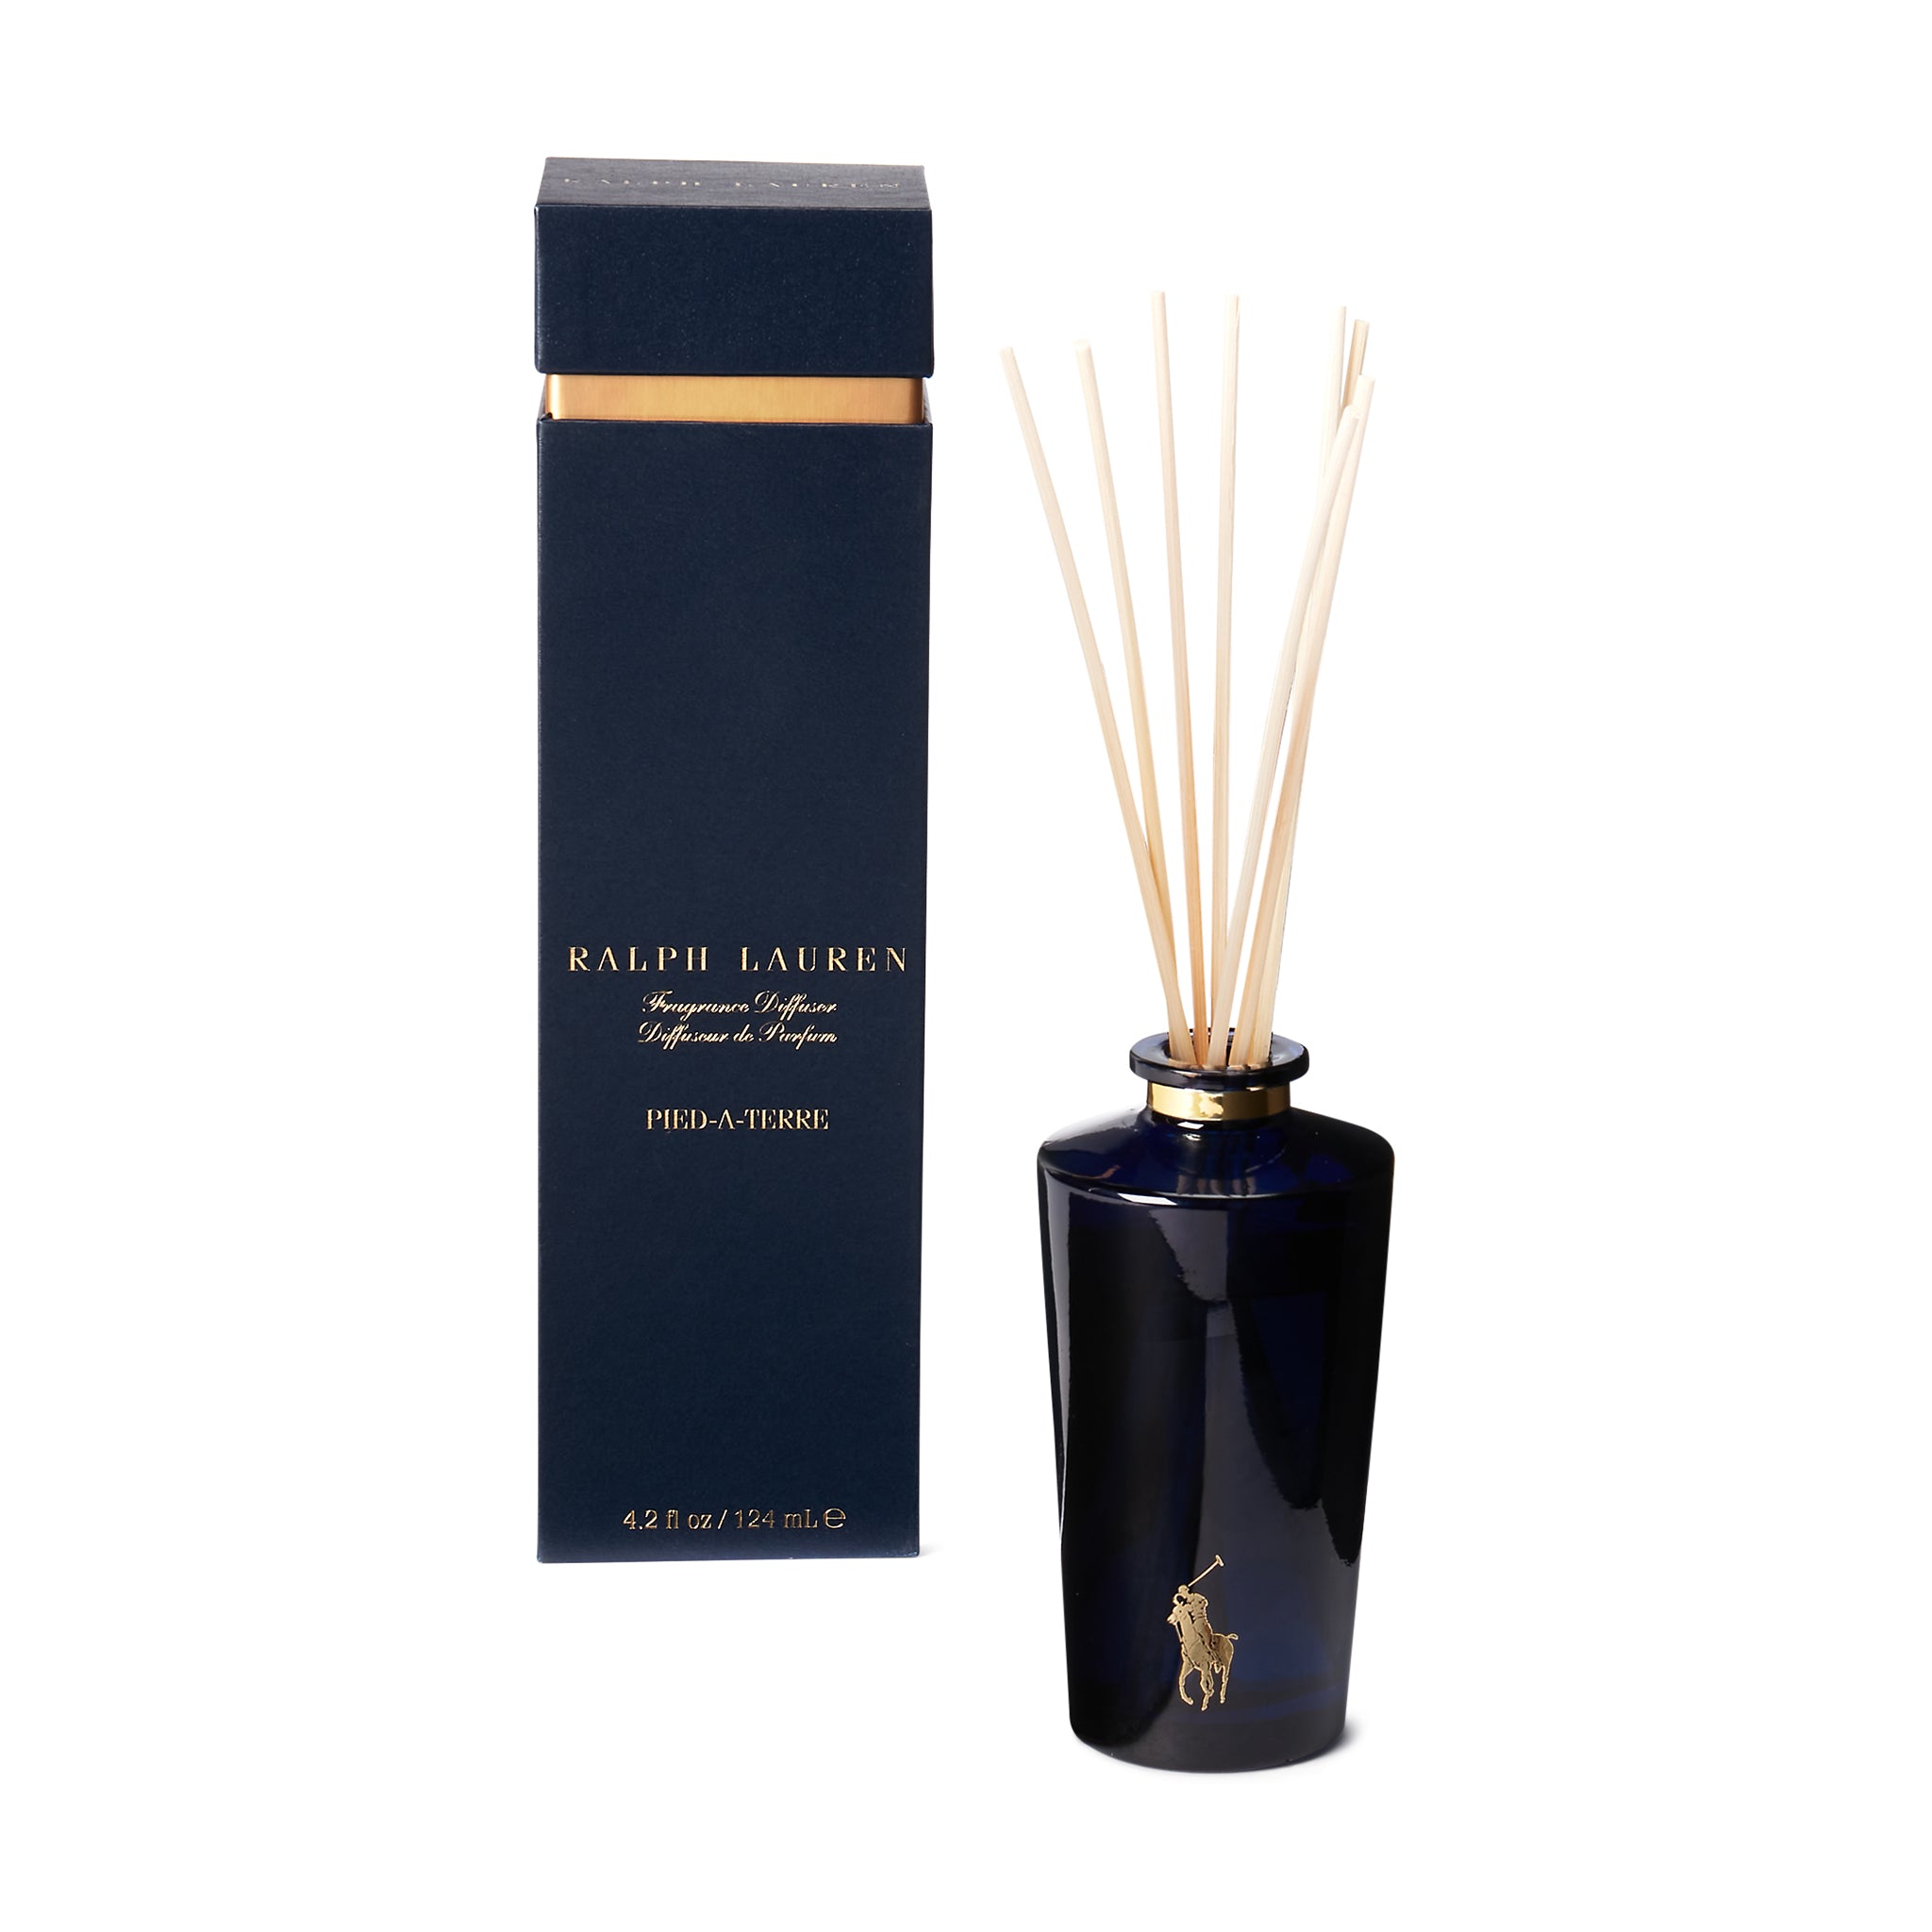 ralph lauren pied-a-terre diffuser navy and gold diffusers 